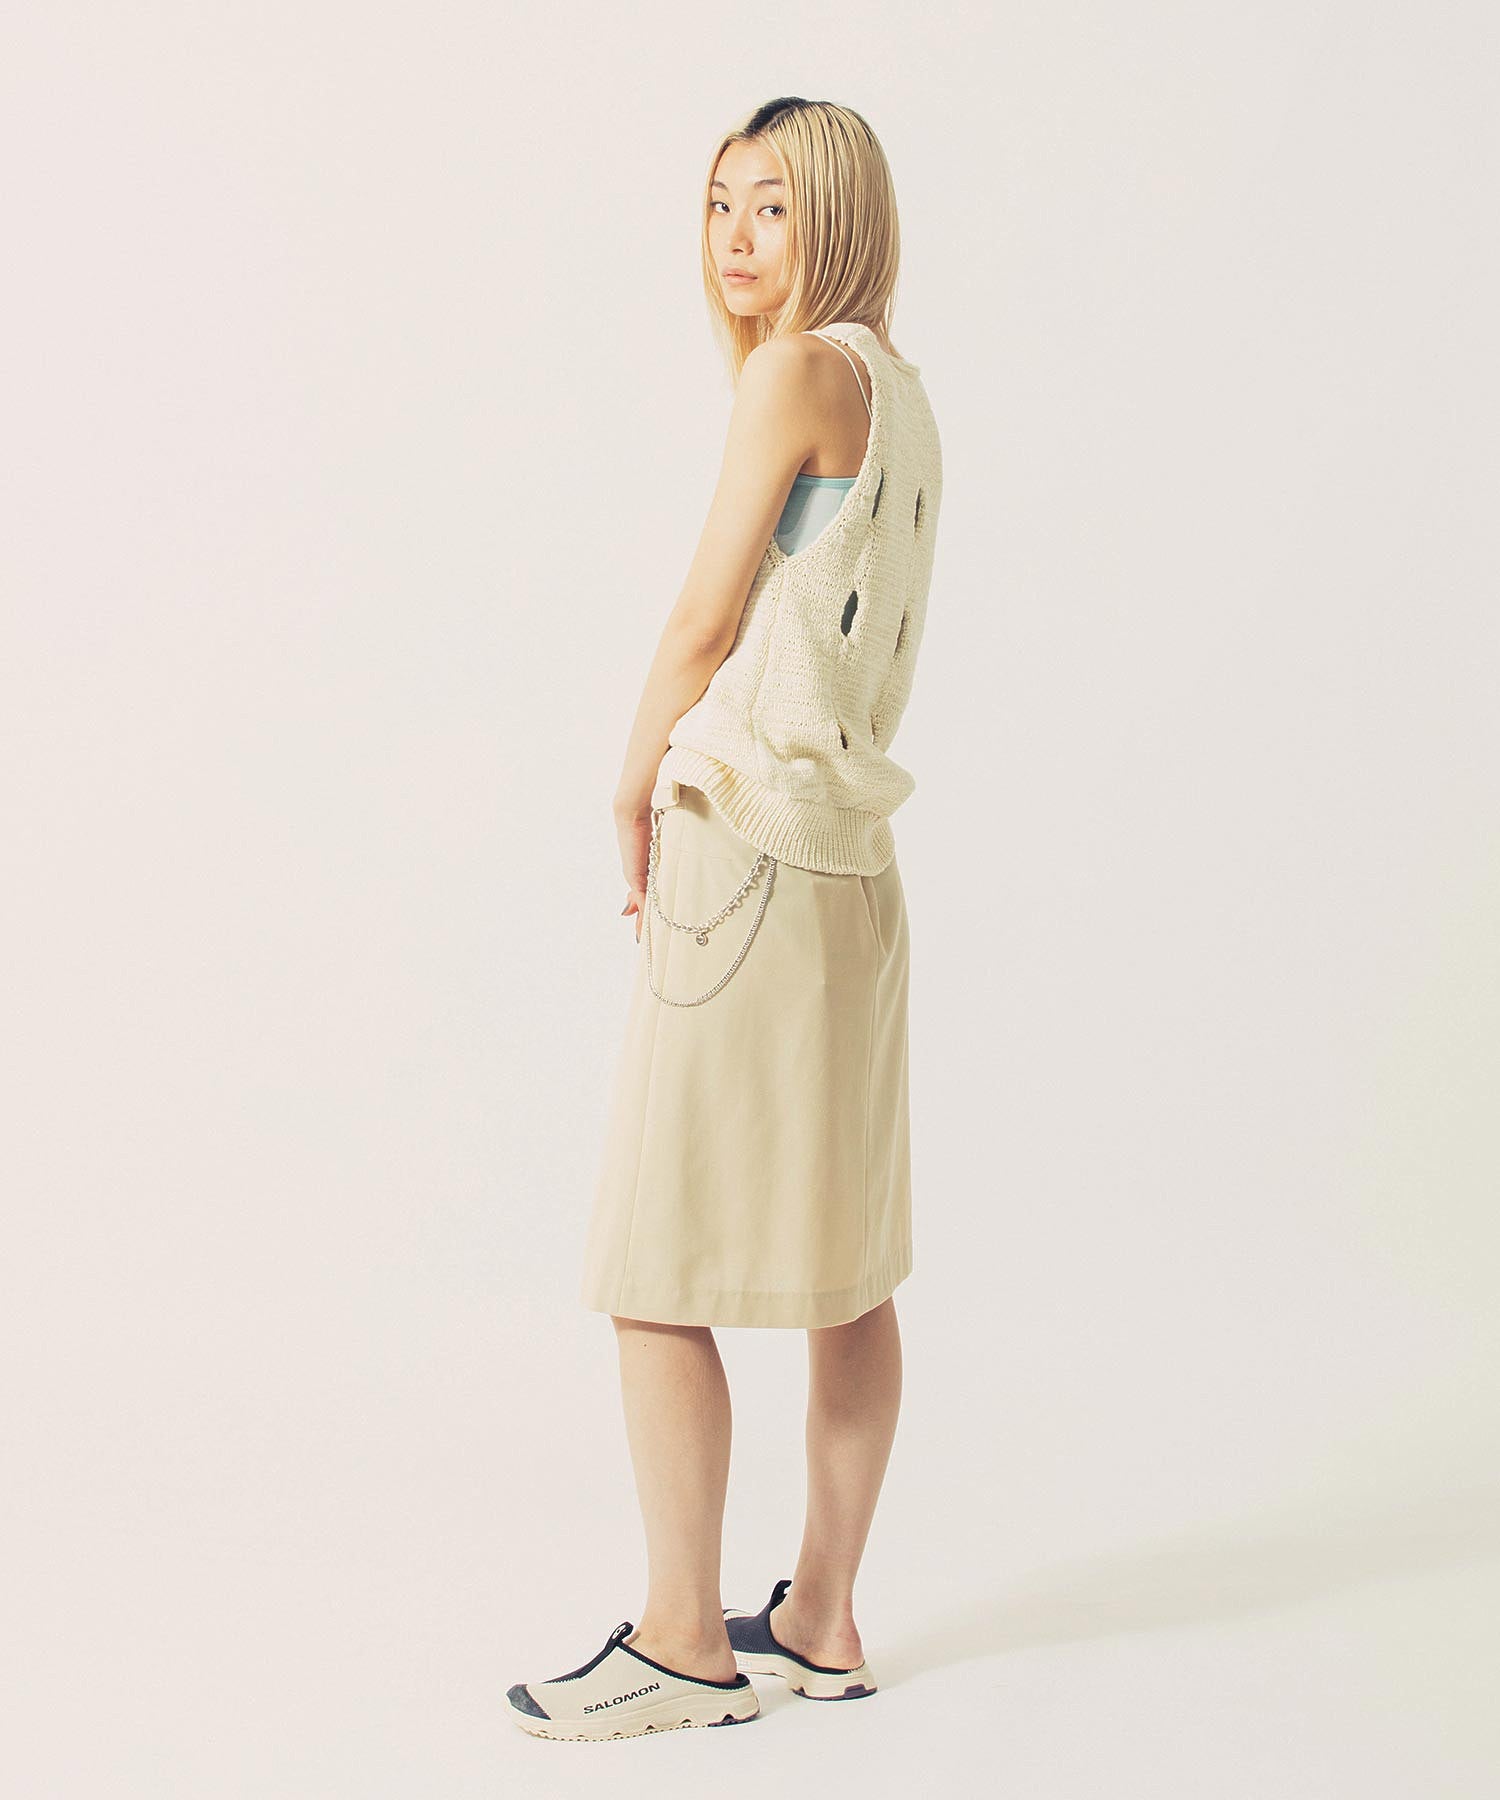 THE OPEN PRODUCT/ザオープンプロダクト/ DETACHABLE CHAIN WRAP SKIRT GTO221SK001